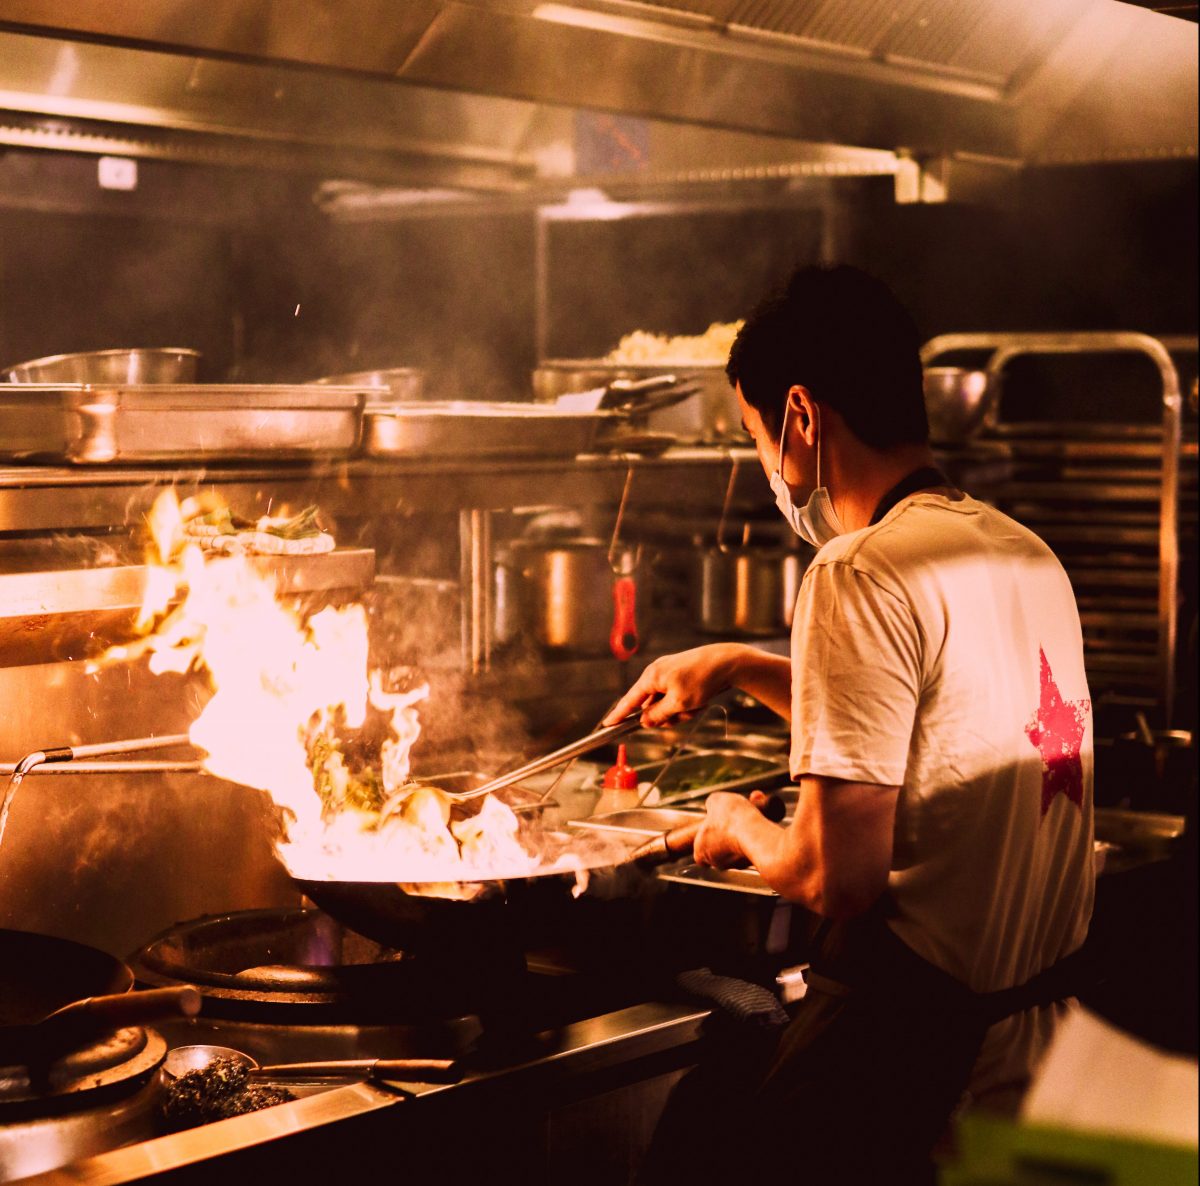 Chef with flaming wok